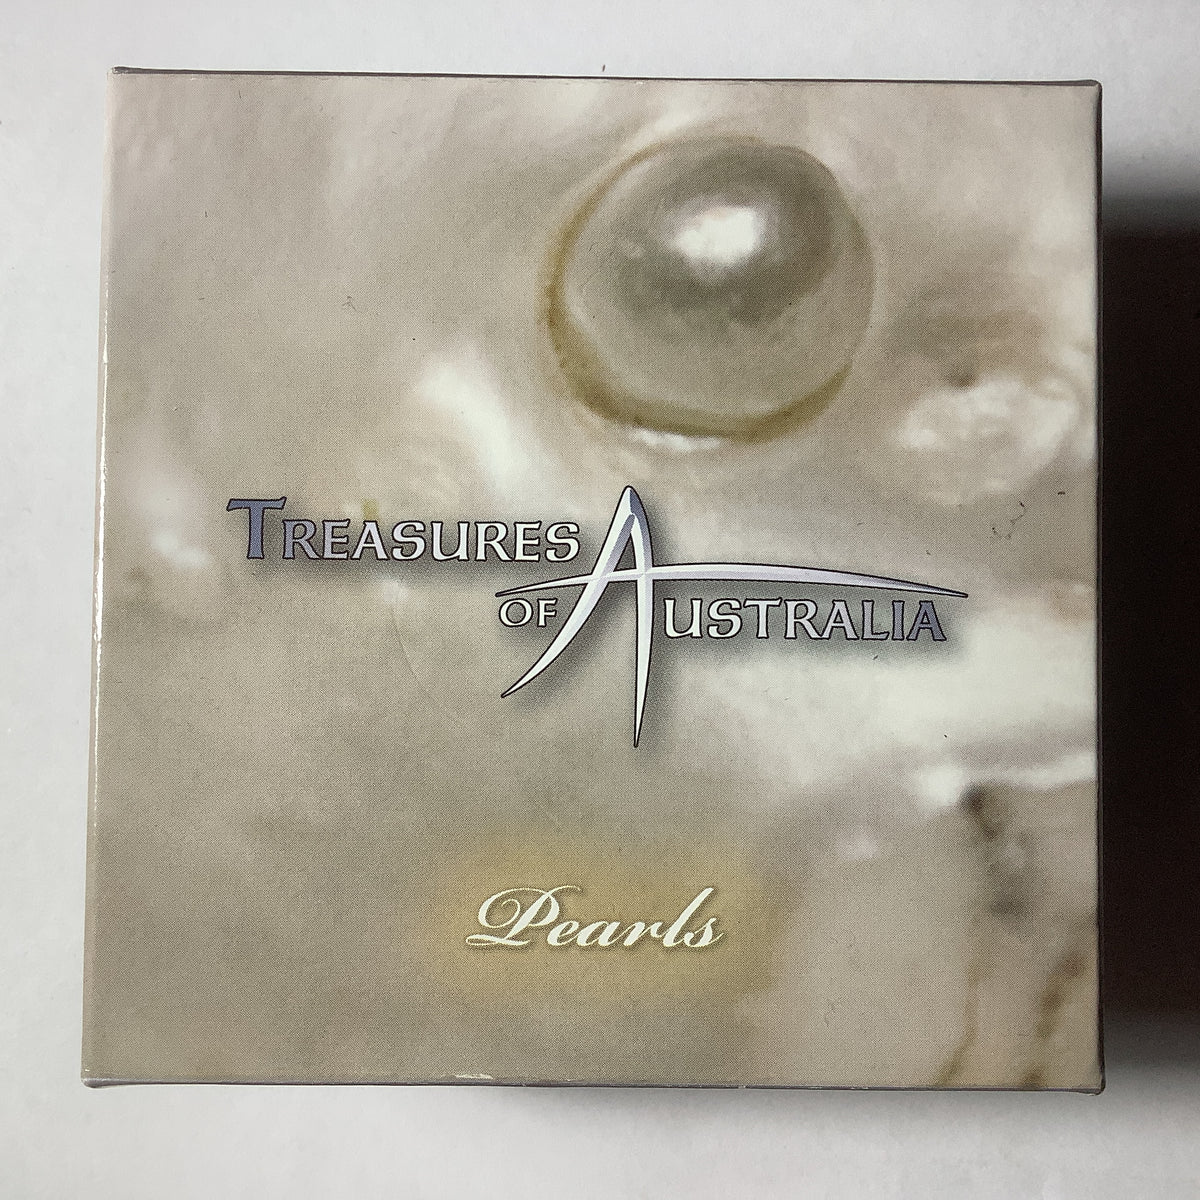 2011 Treasures of Australia 1 ounce silver proof. Pearls.